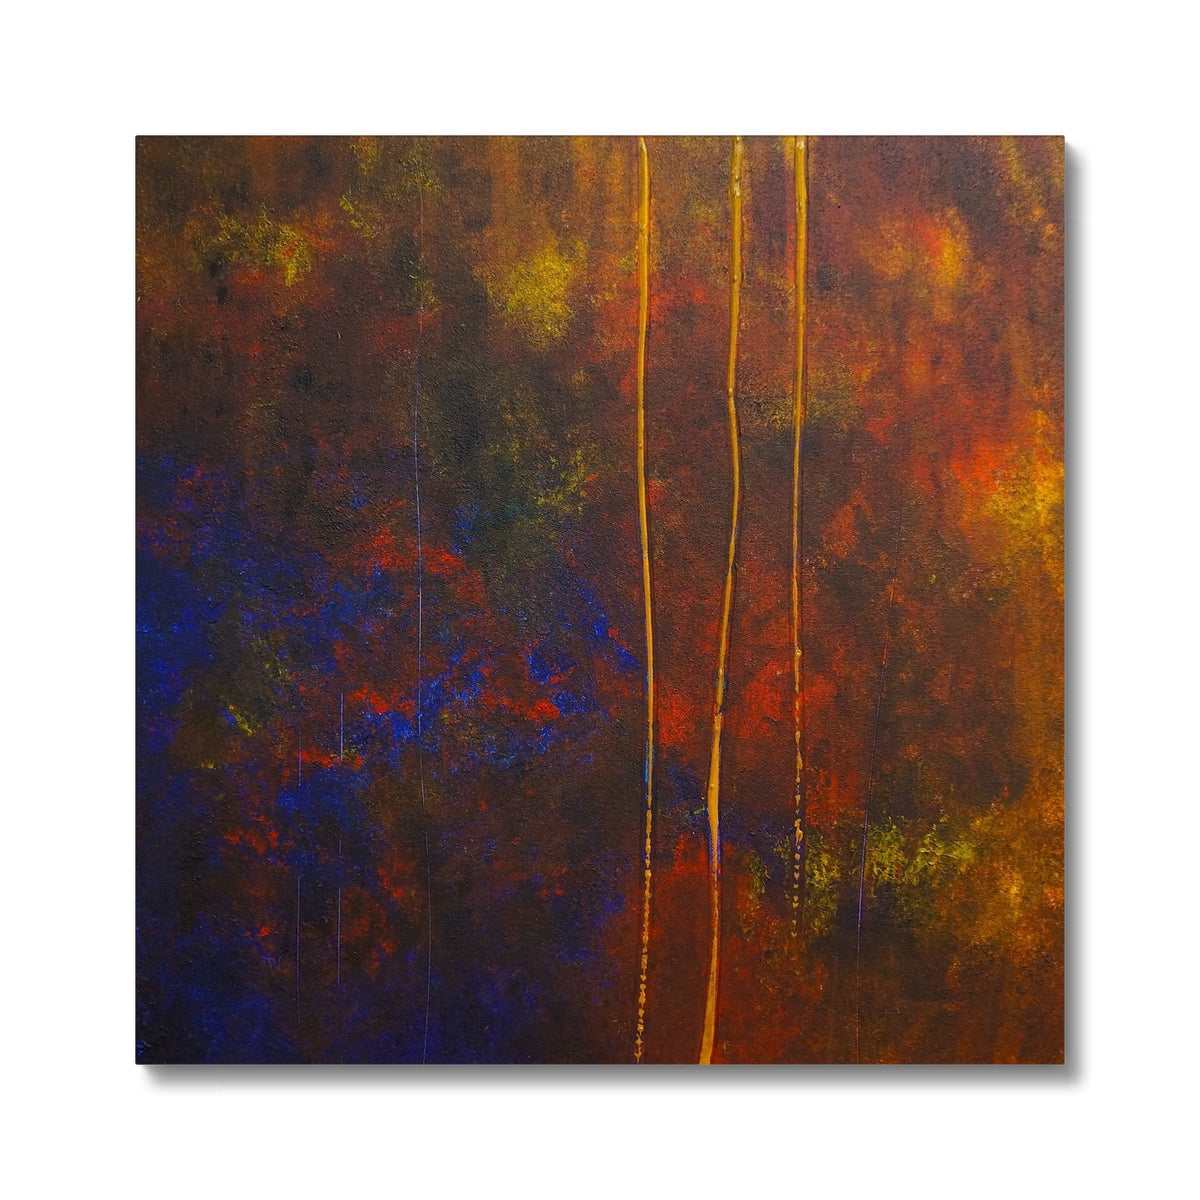 The Autumn Wood Abstract Painting | Canvas From Scotland-Contemporary Stretched Canvas Prints-Abstract & Impressionistic Art Gallery-24"x24"-Paintings, Prints, Homeware, Art Gifts From Scotland By Scottish Artist Kevin Hunter